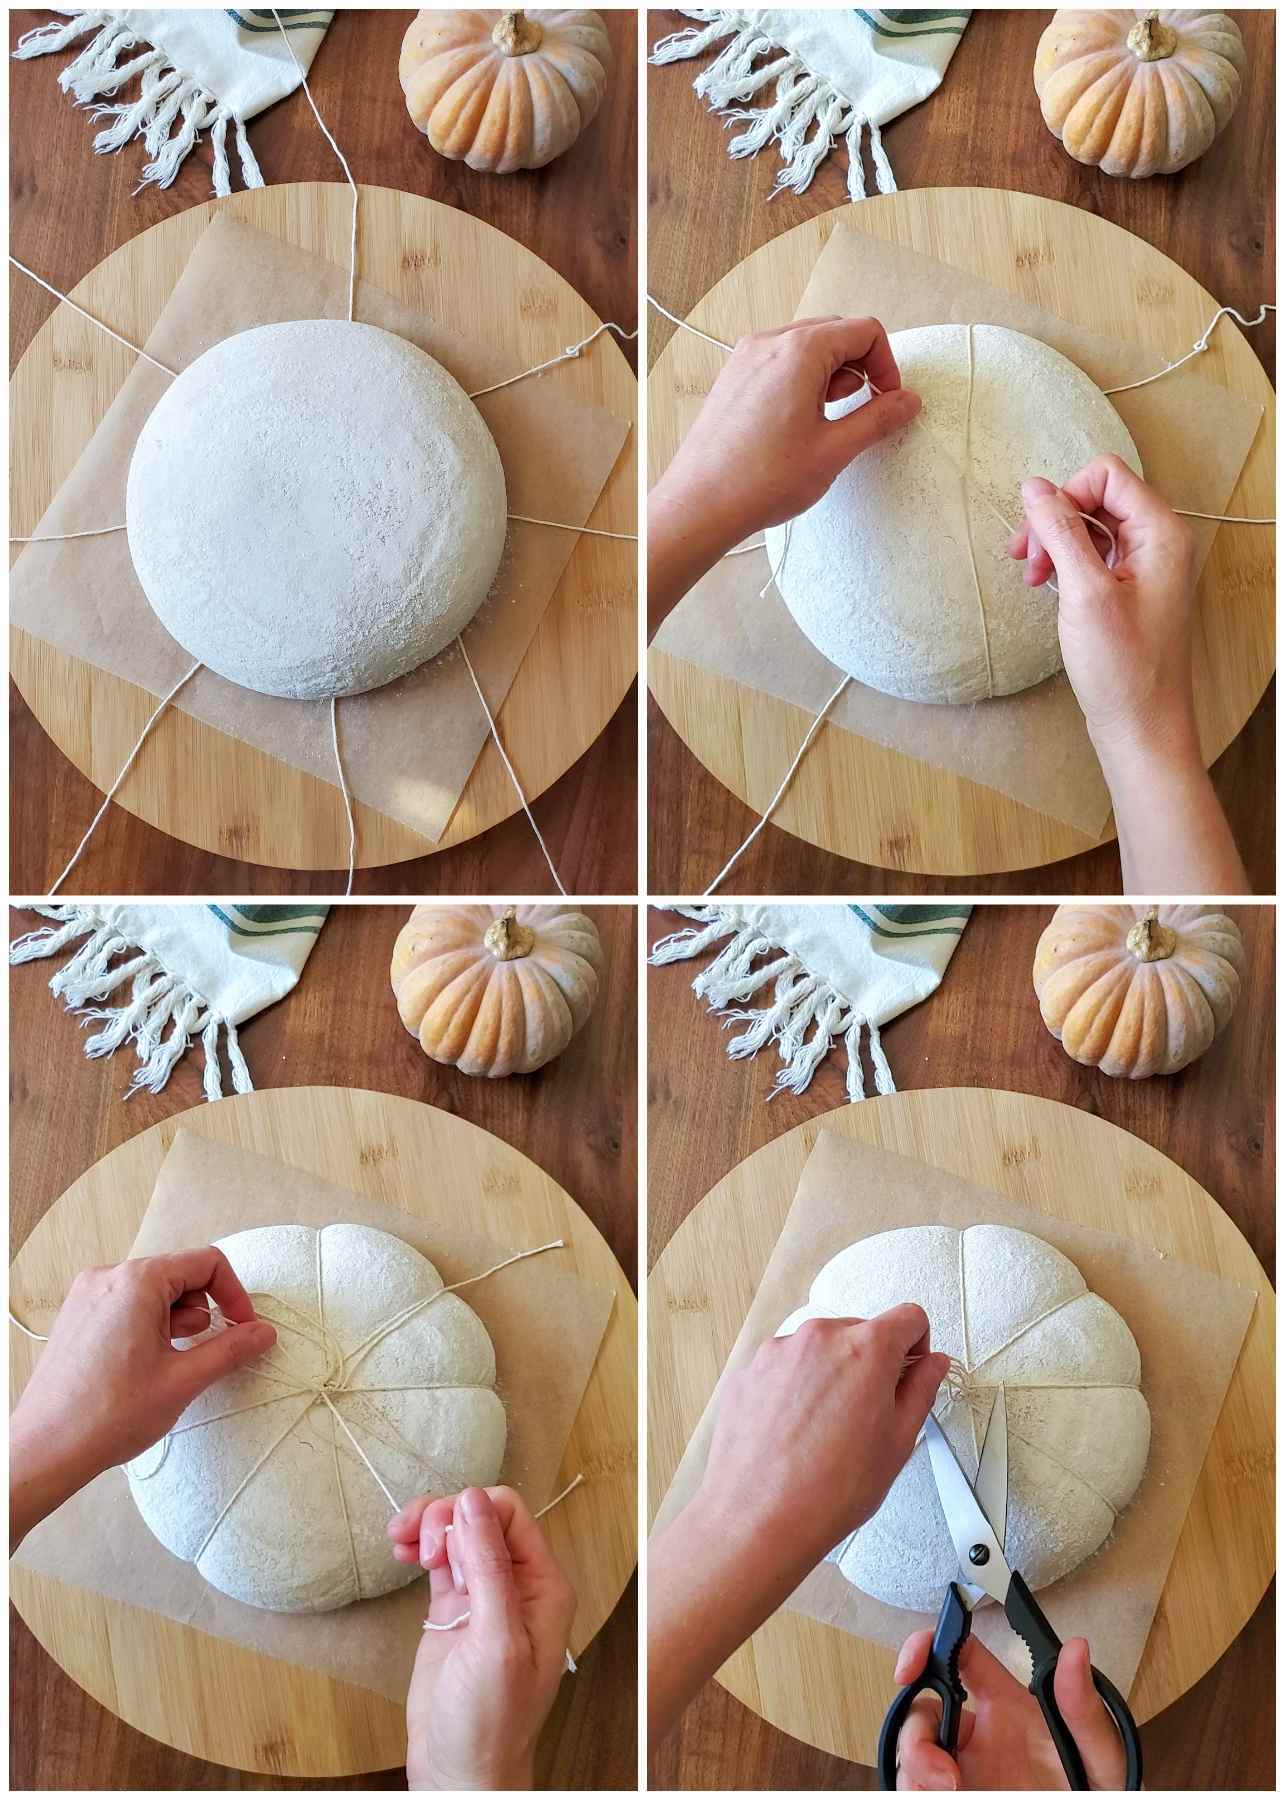 A four way image collage, the first image shows a raw loaf of dough with eight pieces of string extended out from underneath the dough like sun rays. The second image shows two hands tying two string opposite from each other in the middle. The third image shows two hands tying off the final two strings in the middle after creating eight pie slice shaped sections in the loaf. The fourth image shows scissors being used to cut off the excess string around the knot that is in the middle of the dough. 